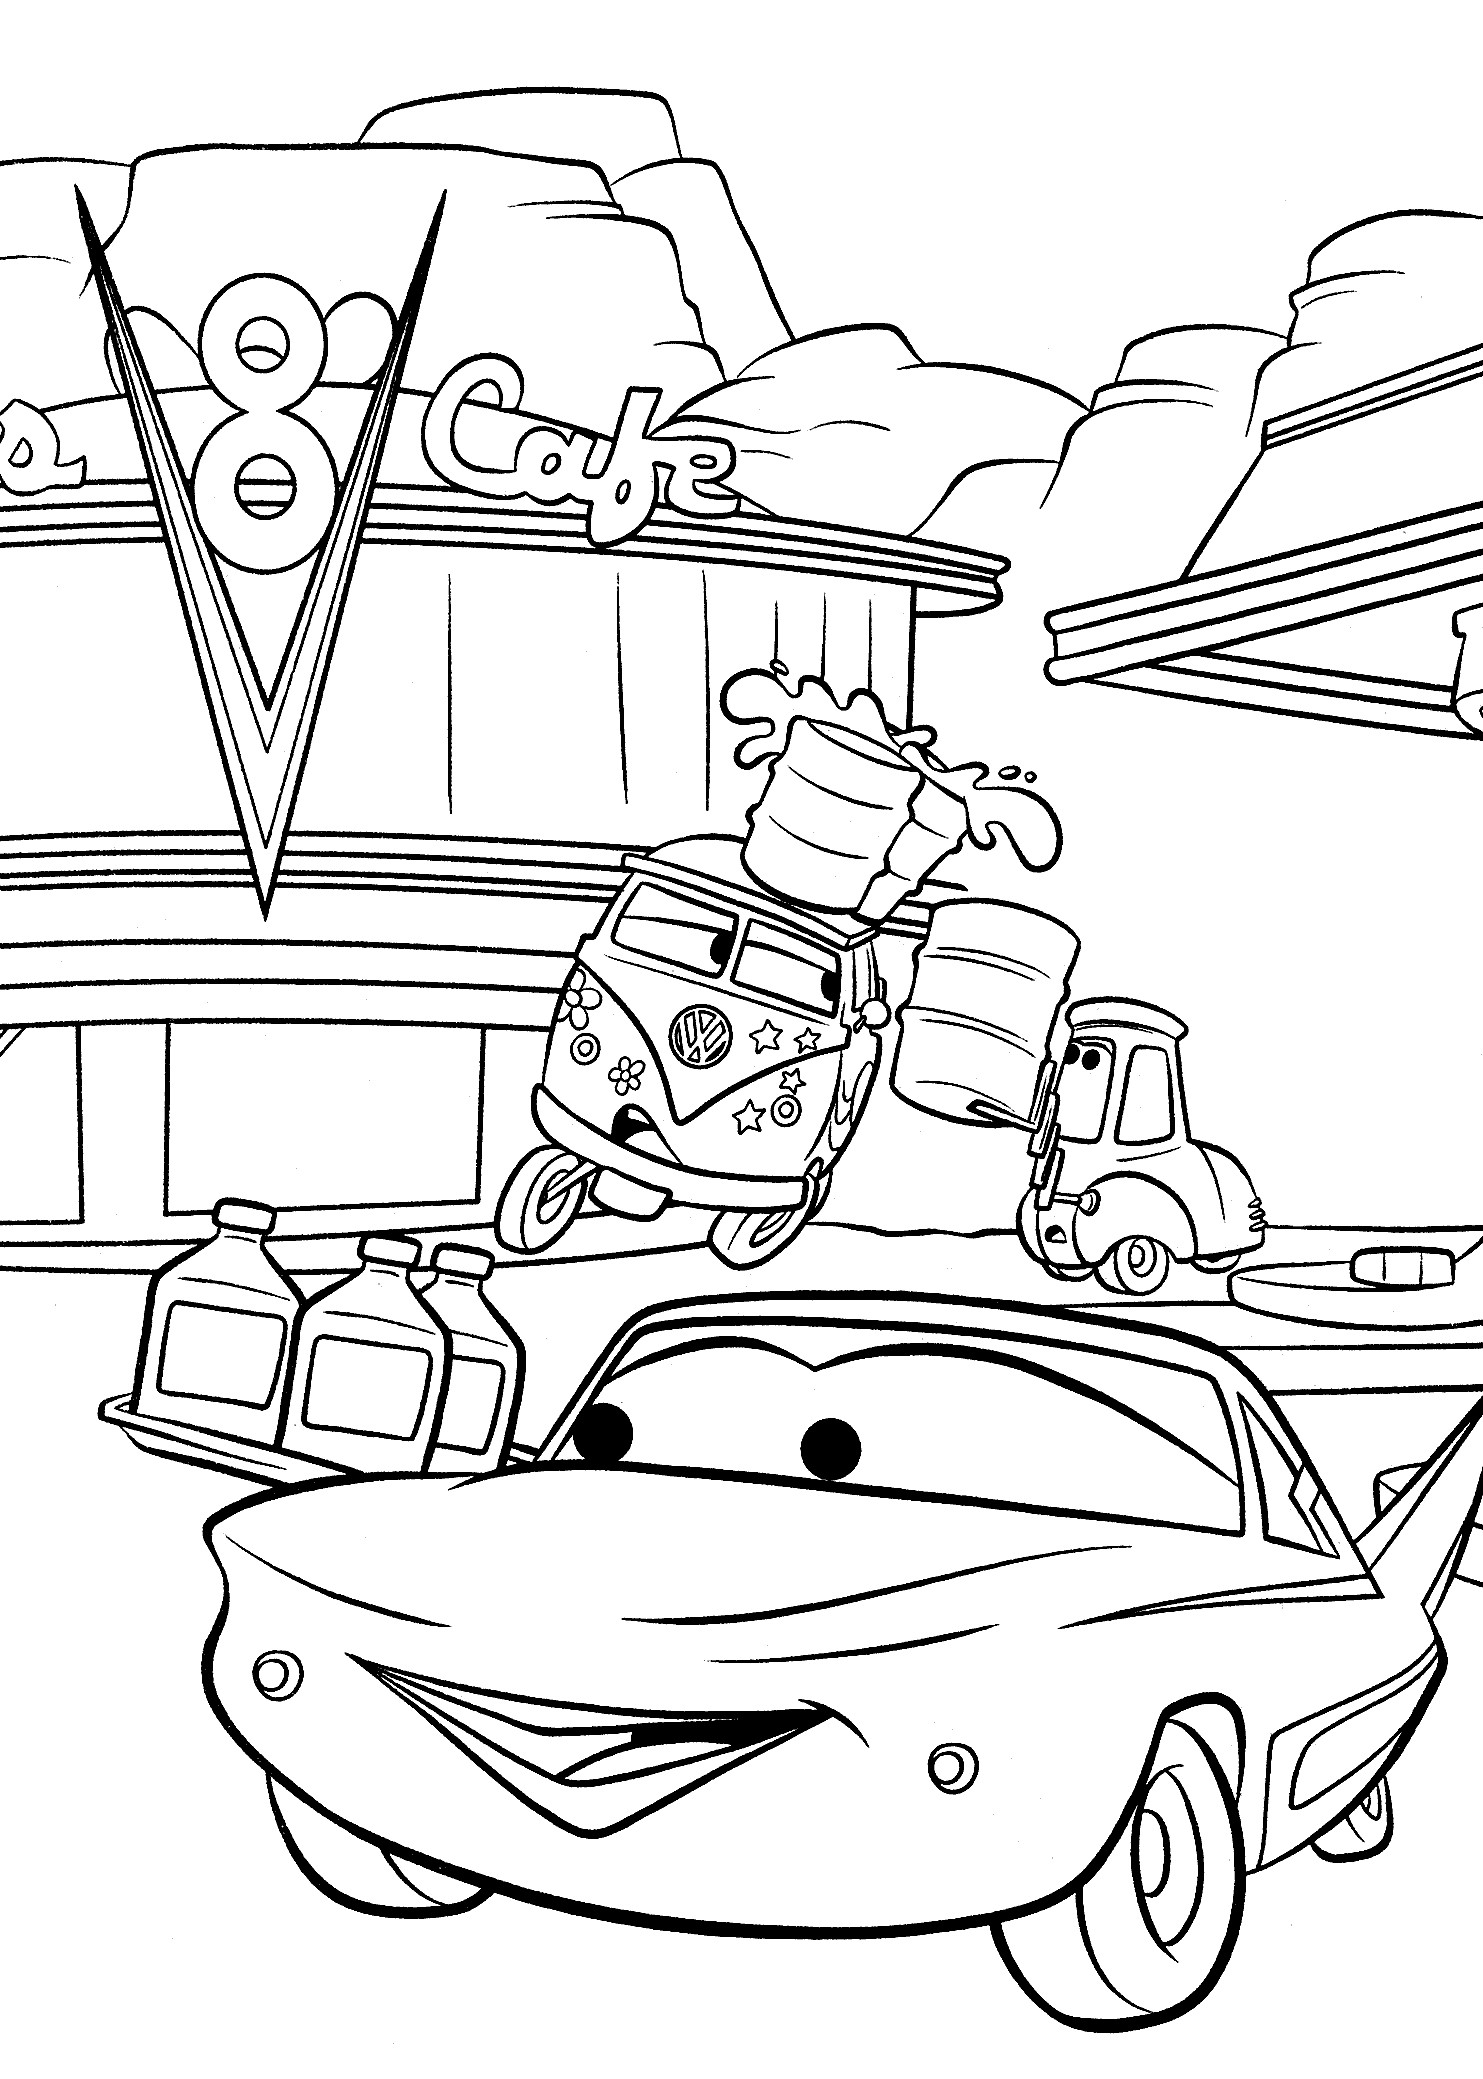 Car Coloring Pages For Kids
 Cars Coloring Pages for Kids Bestofcoloring